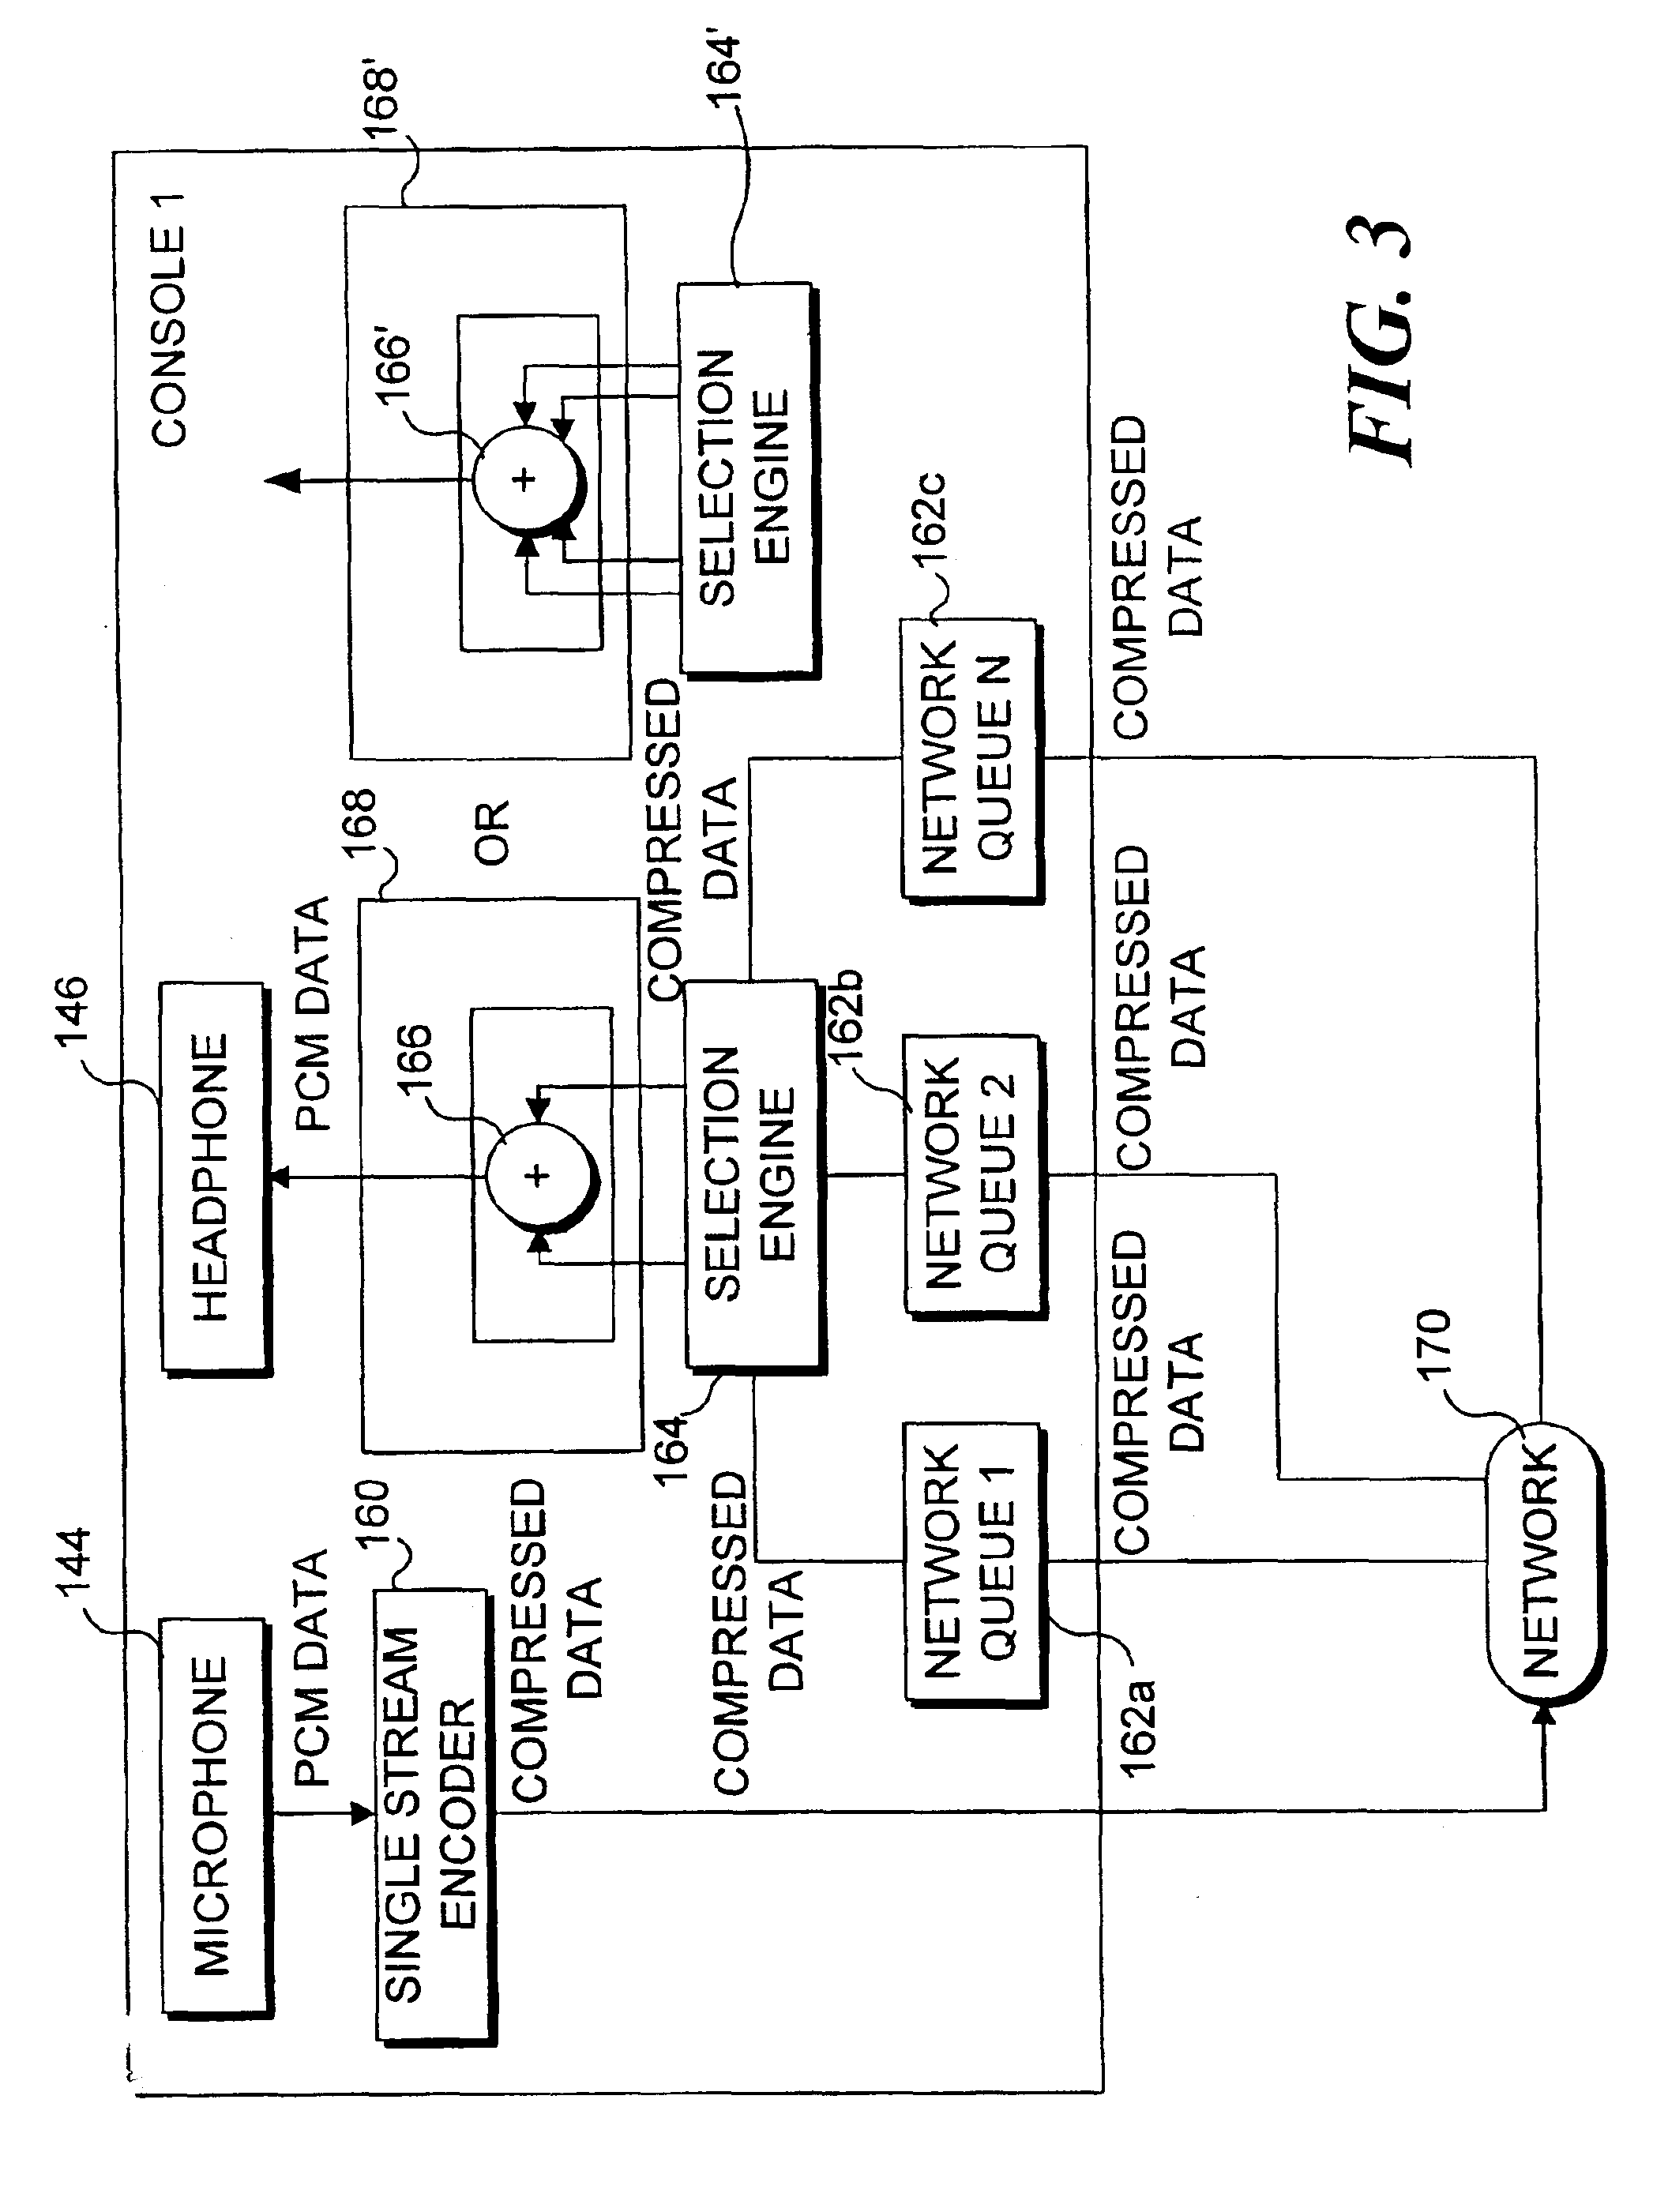 Banning verbal communication to and from a selected party in a game playing system